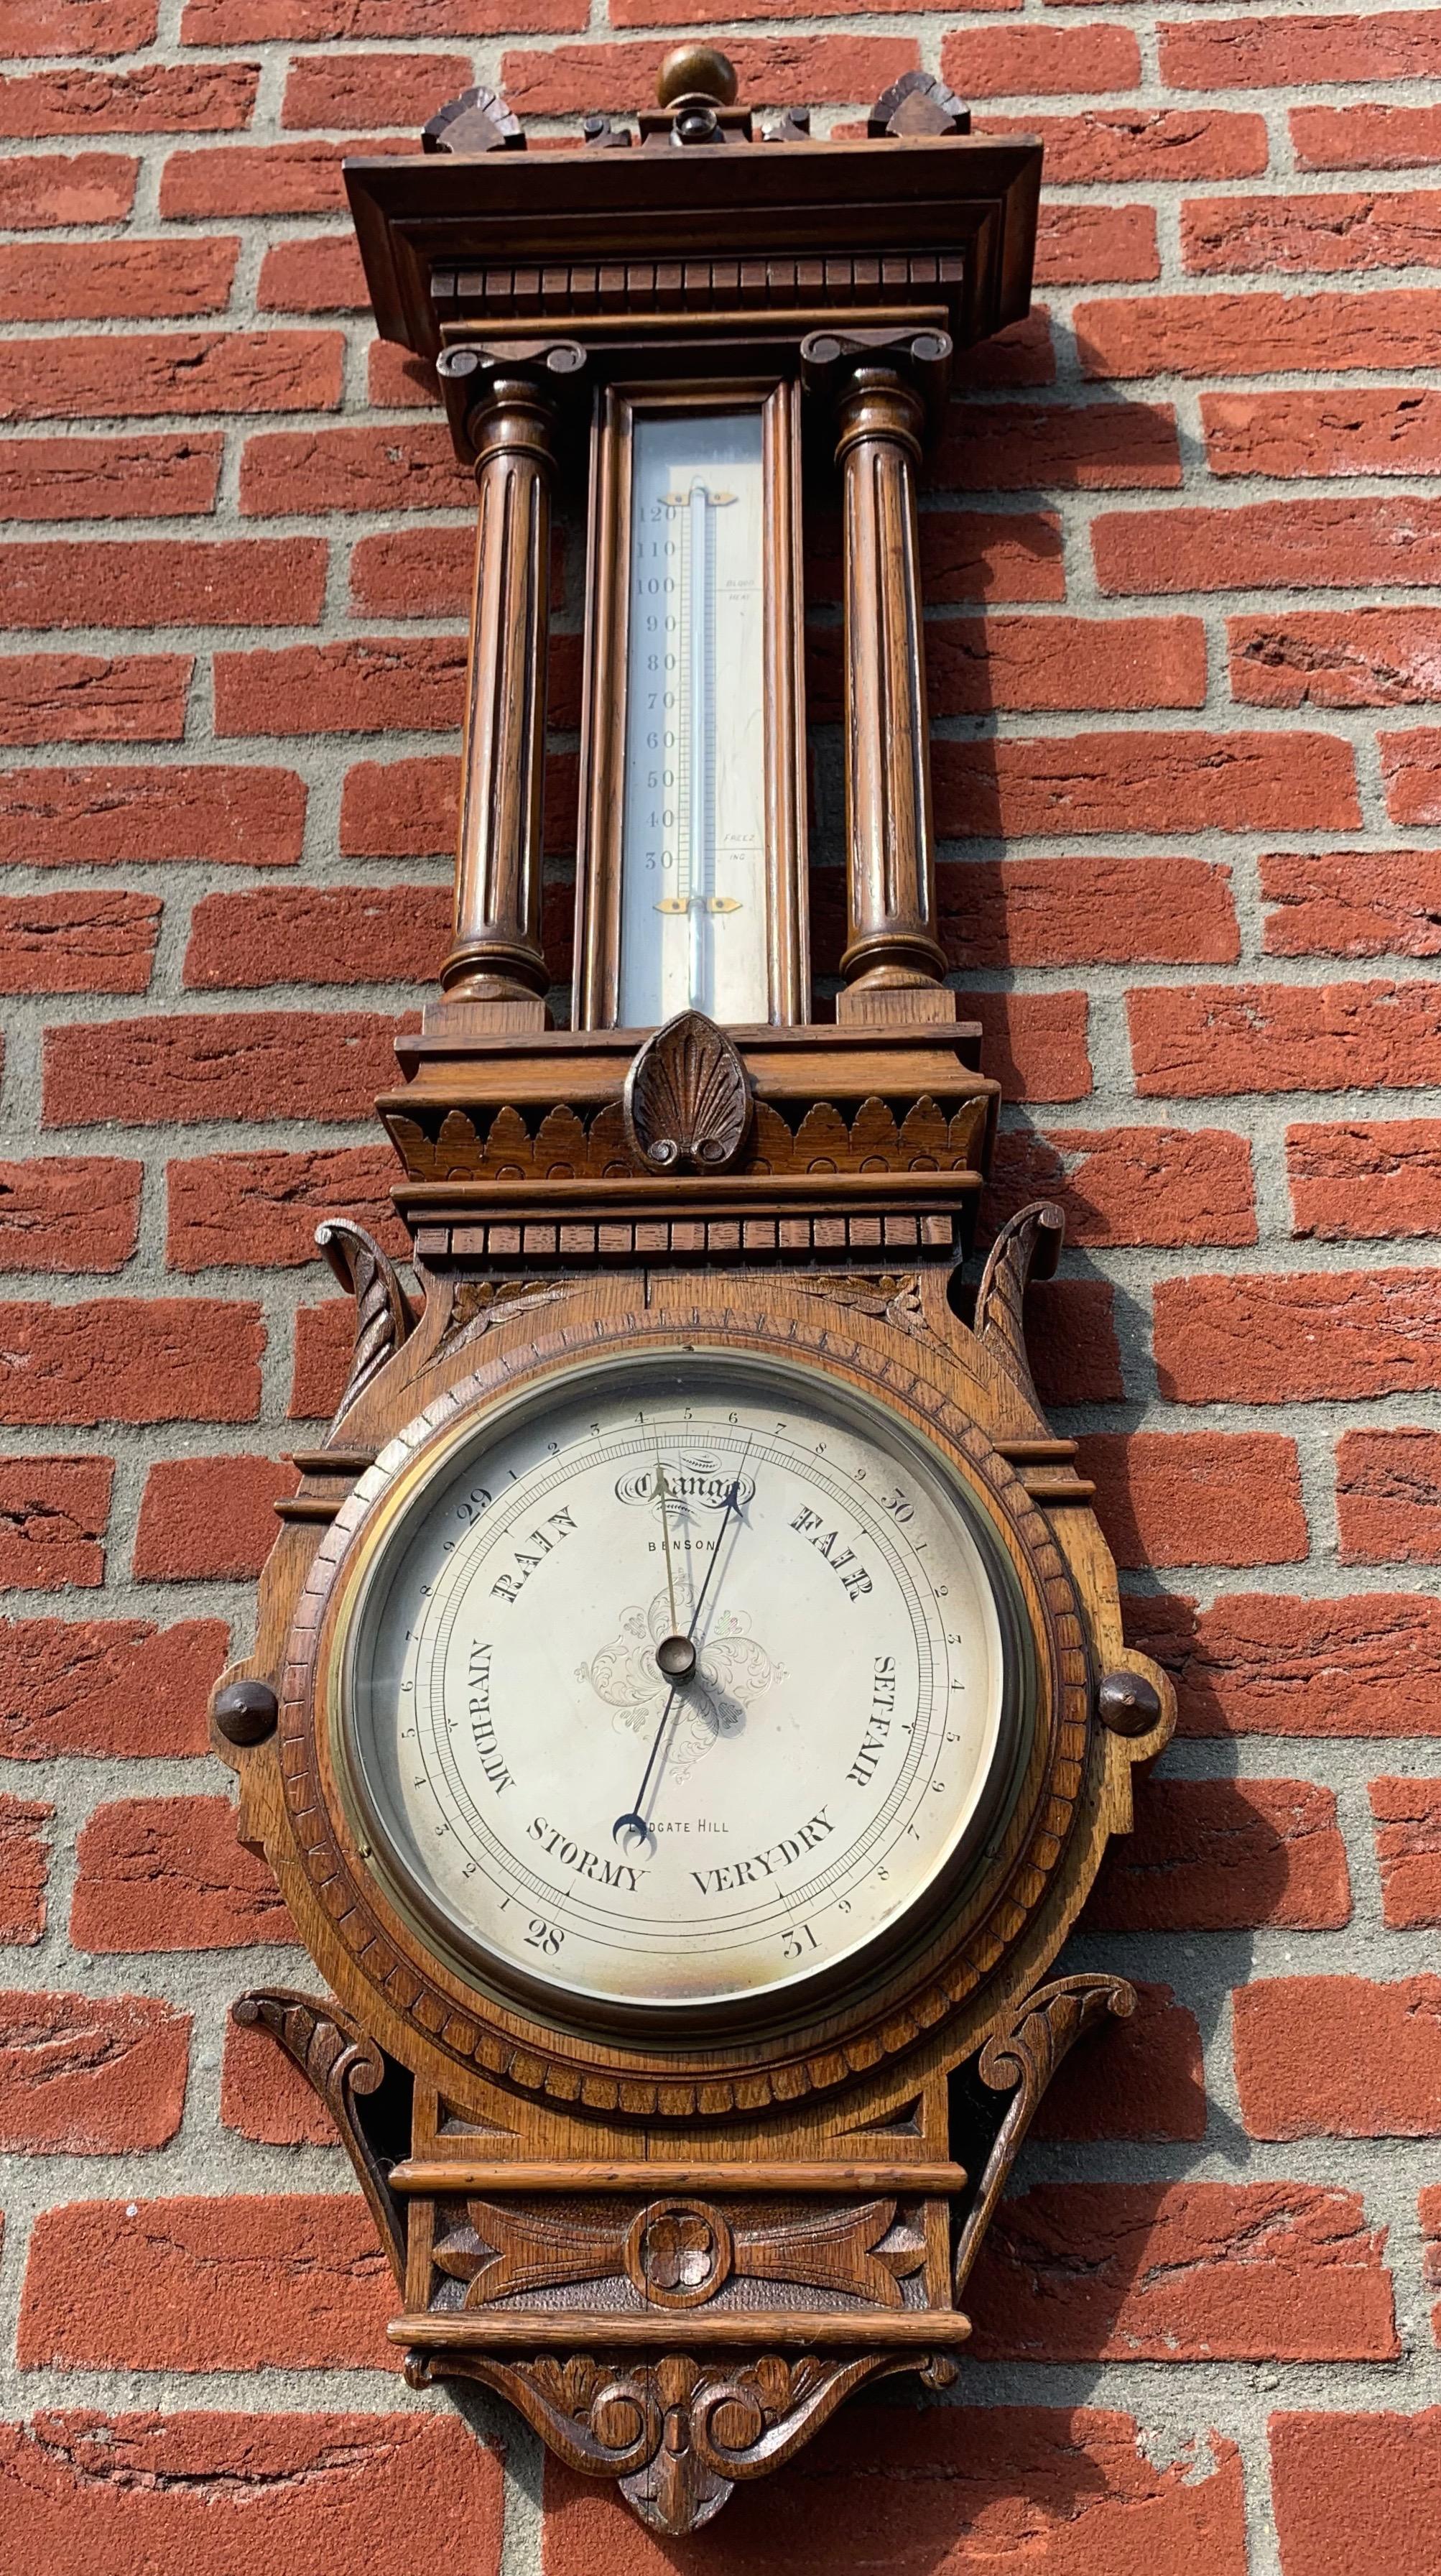 Stunning design and top quality executed antique barometer.

This late 19th-early 20th century, English manufactured wall barometer has everything that makes an antique worthwhile. First of all, the quality of the workmanship is second to none. The